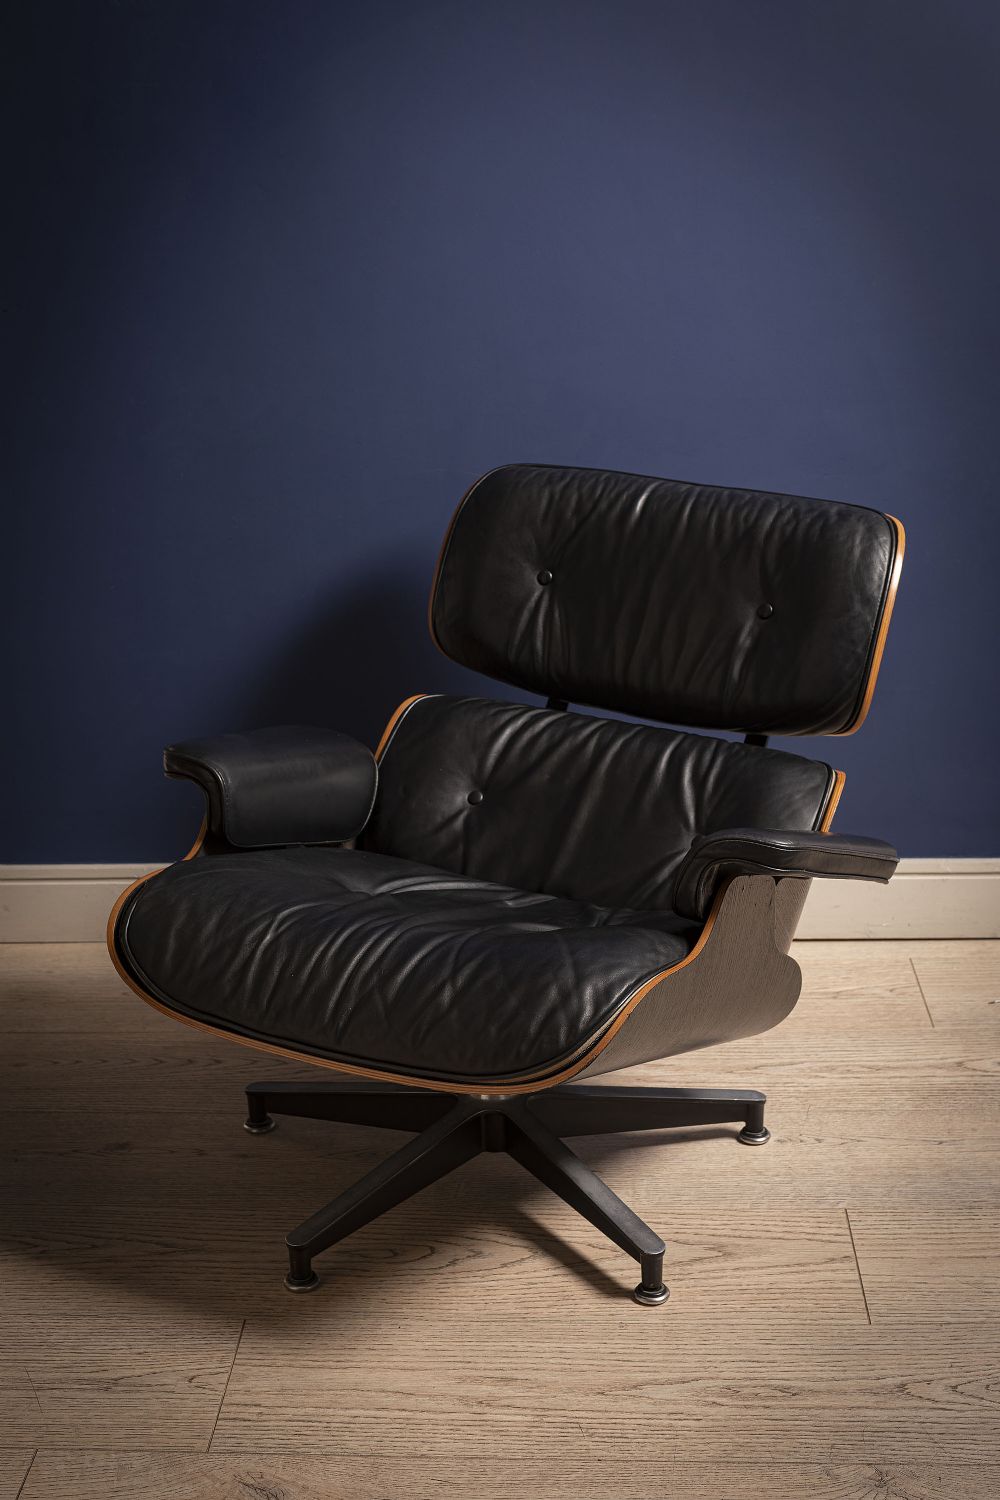 Lot 62 - HERMAN MILLER CHAIR & STOOL by CHARLES AND RAY EAMES